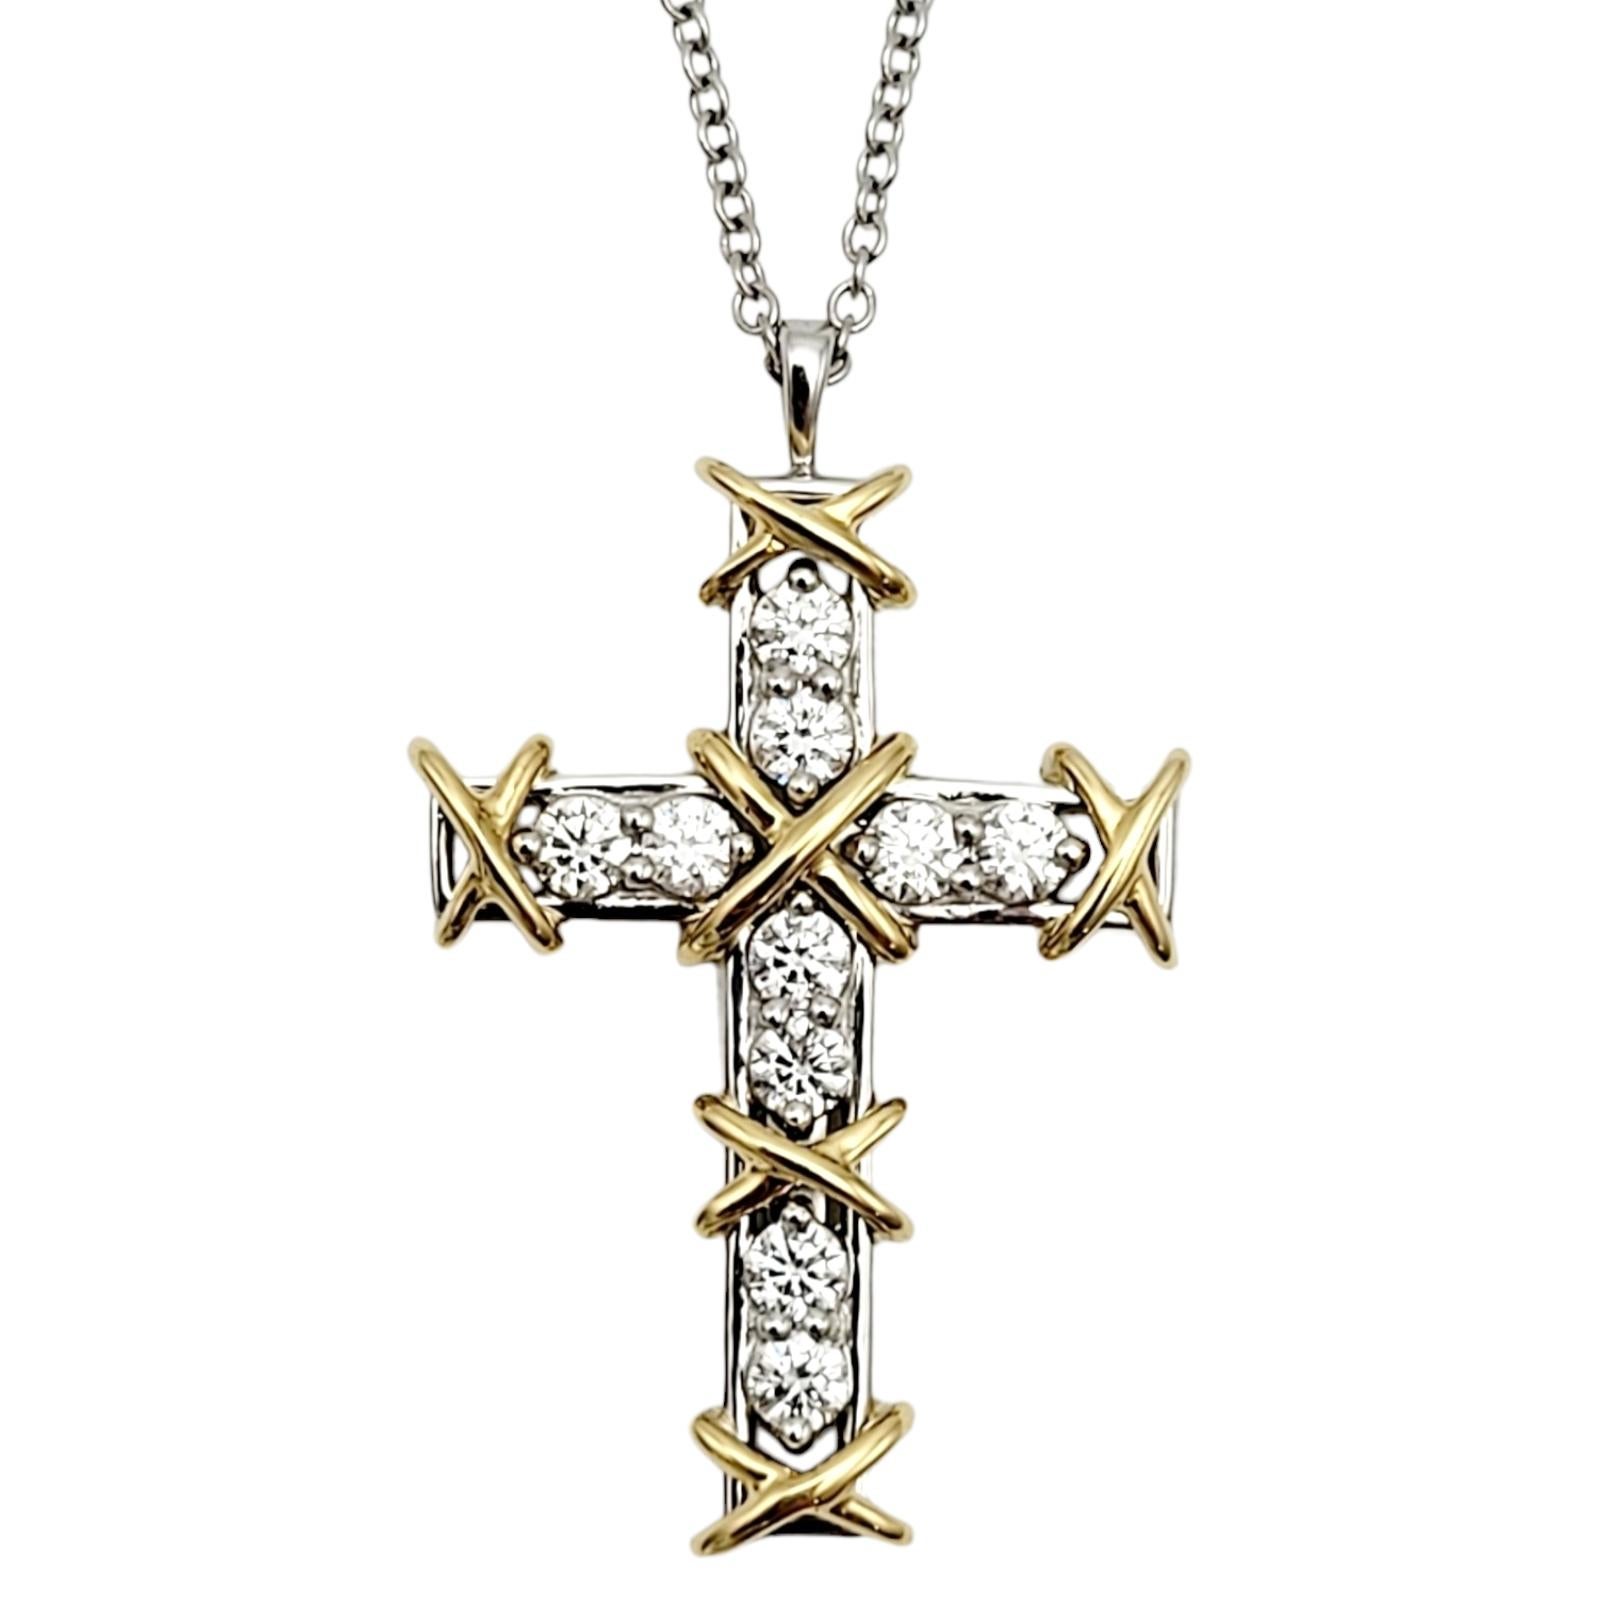 Introducing the magnificent Tiffany & Co. ten stone diamond cross pendant necklace designed by Jean Schlumberger. Founded in 1837 in New York City, Tiffany & Co. is one of the world's most storied luxury design houses recognized globally for its